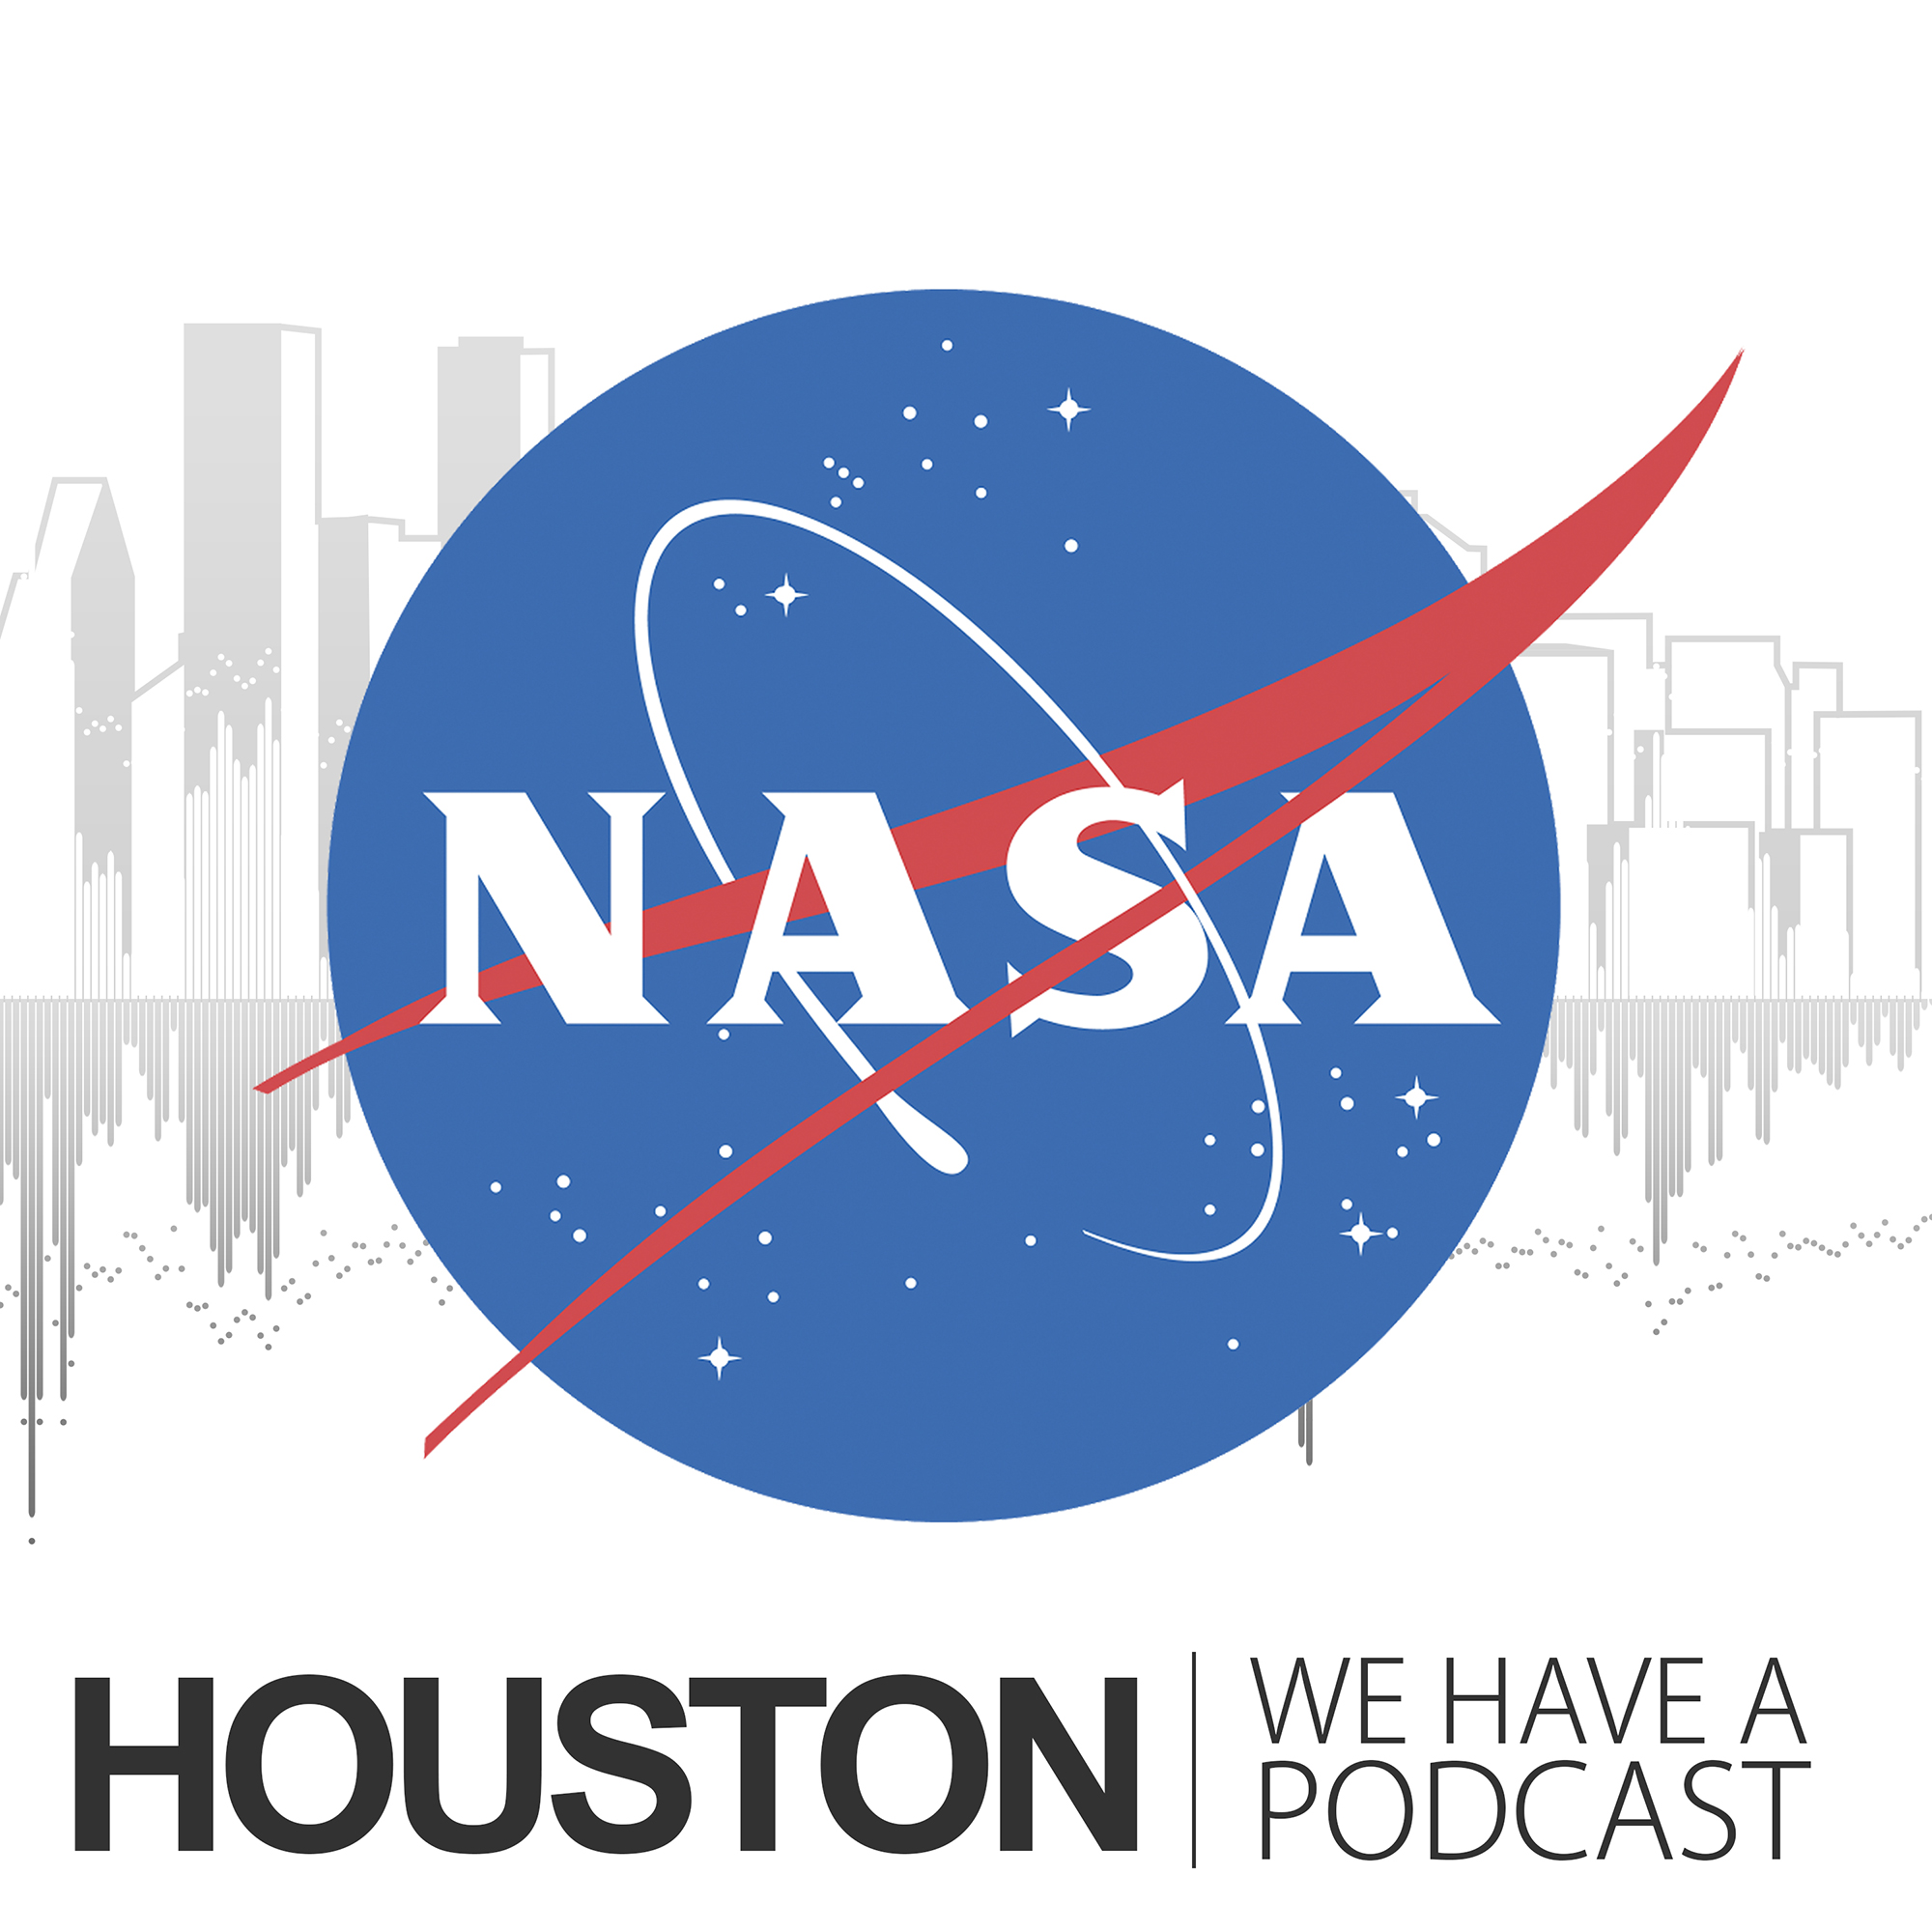 Houston, we have a podcast